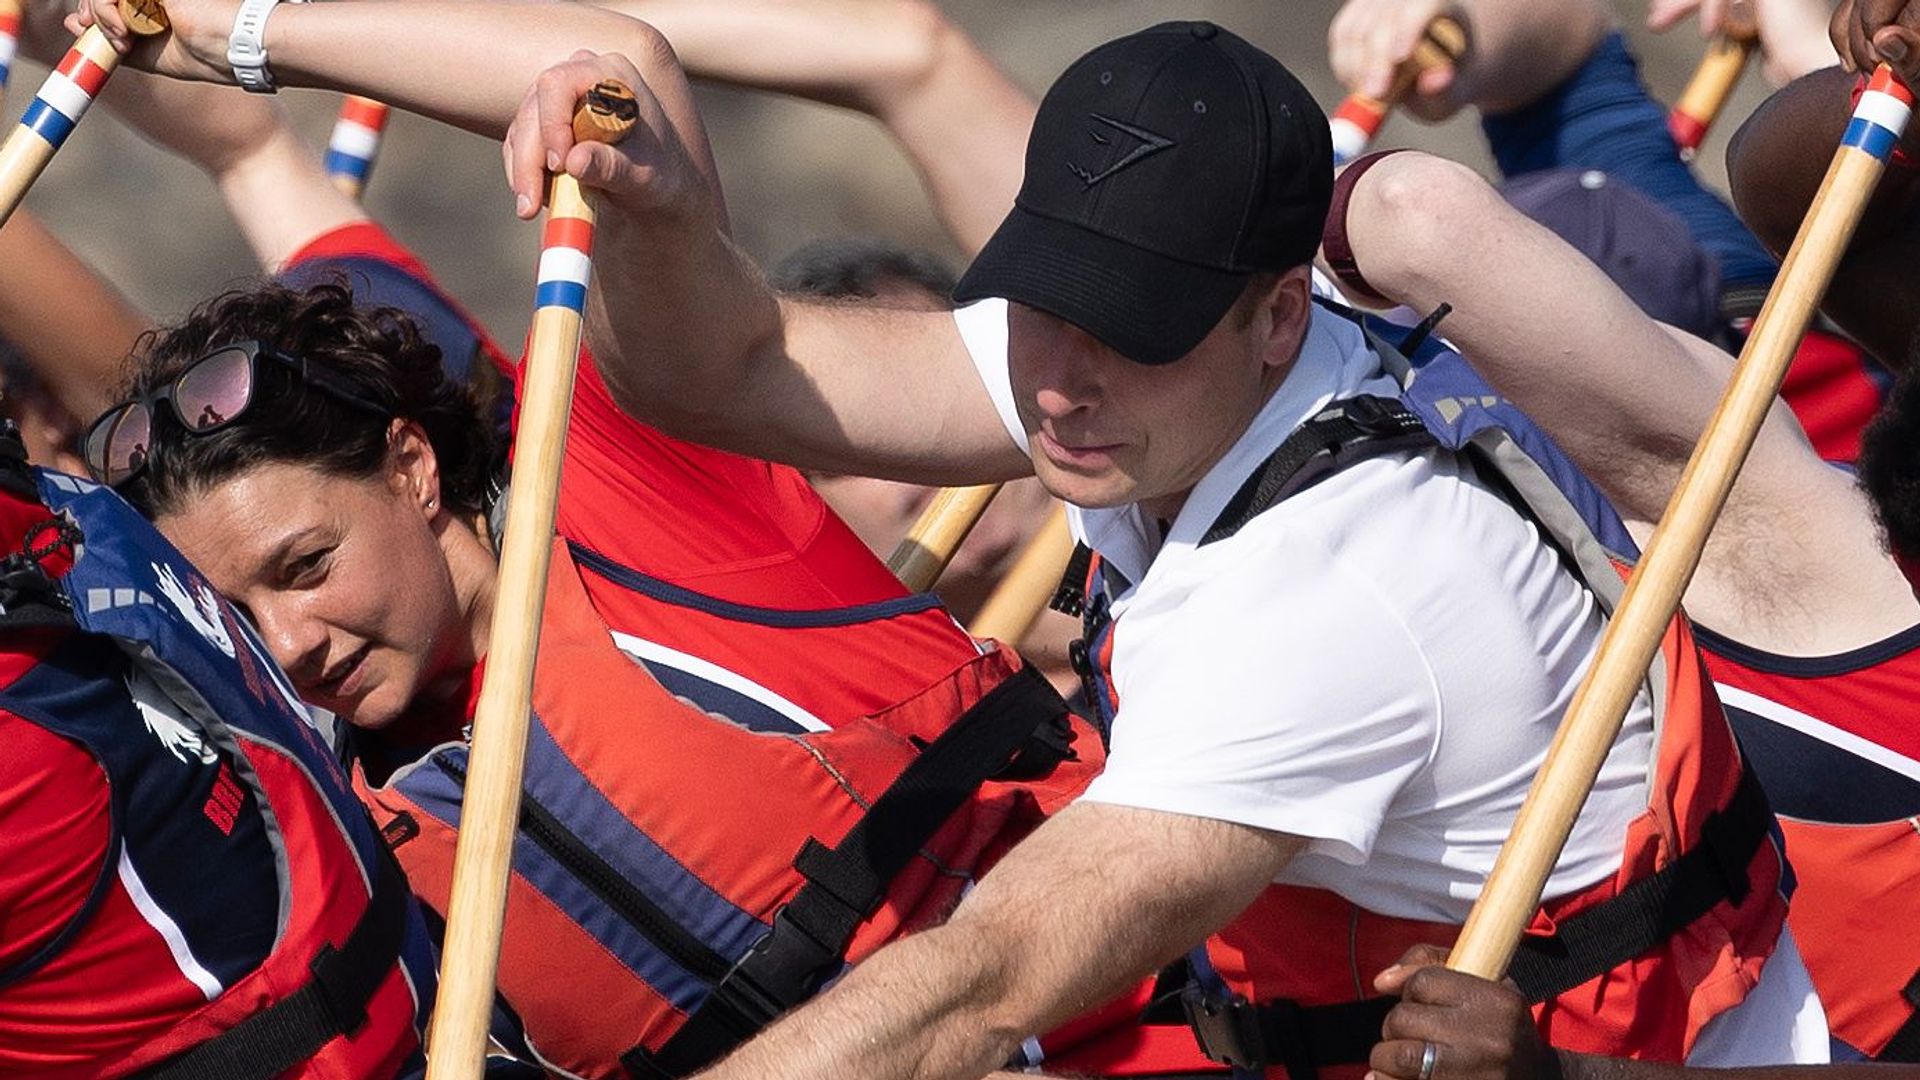 Prince William rowing in Singapore